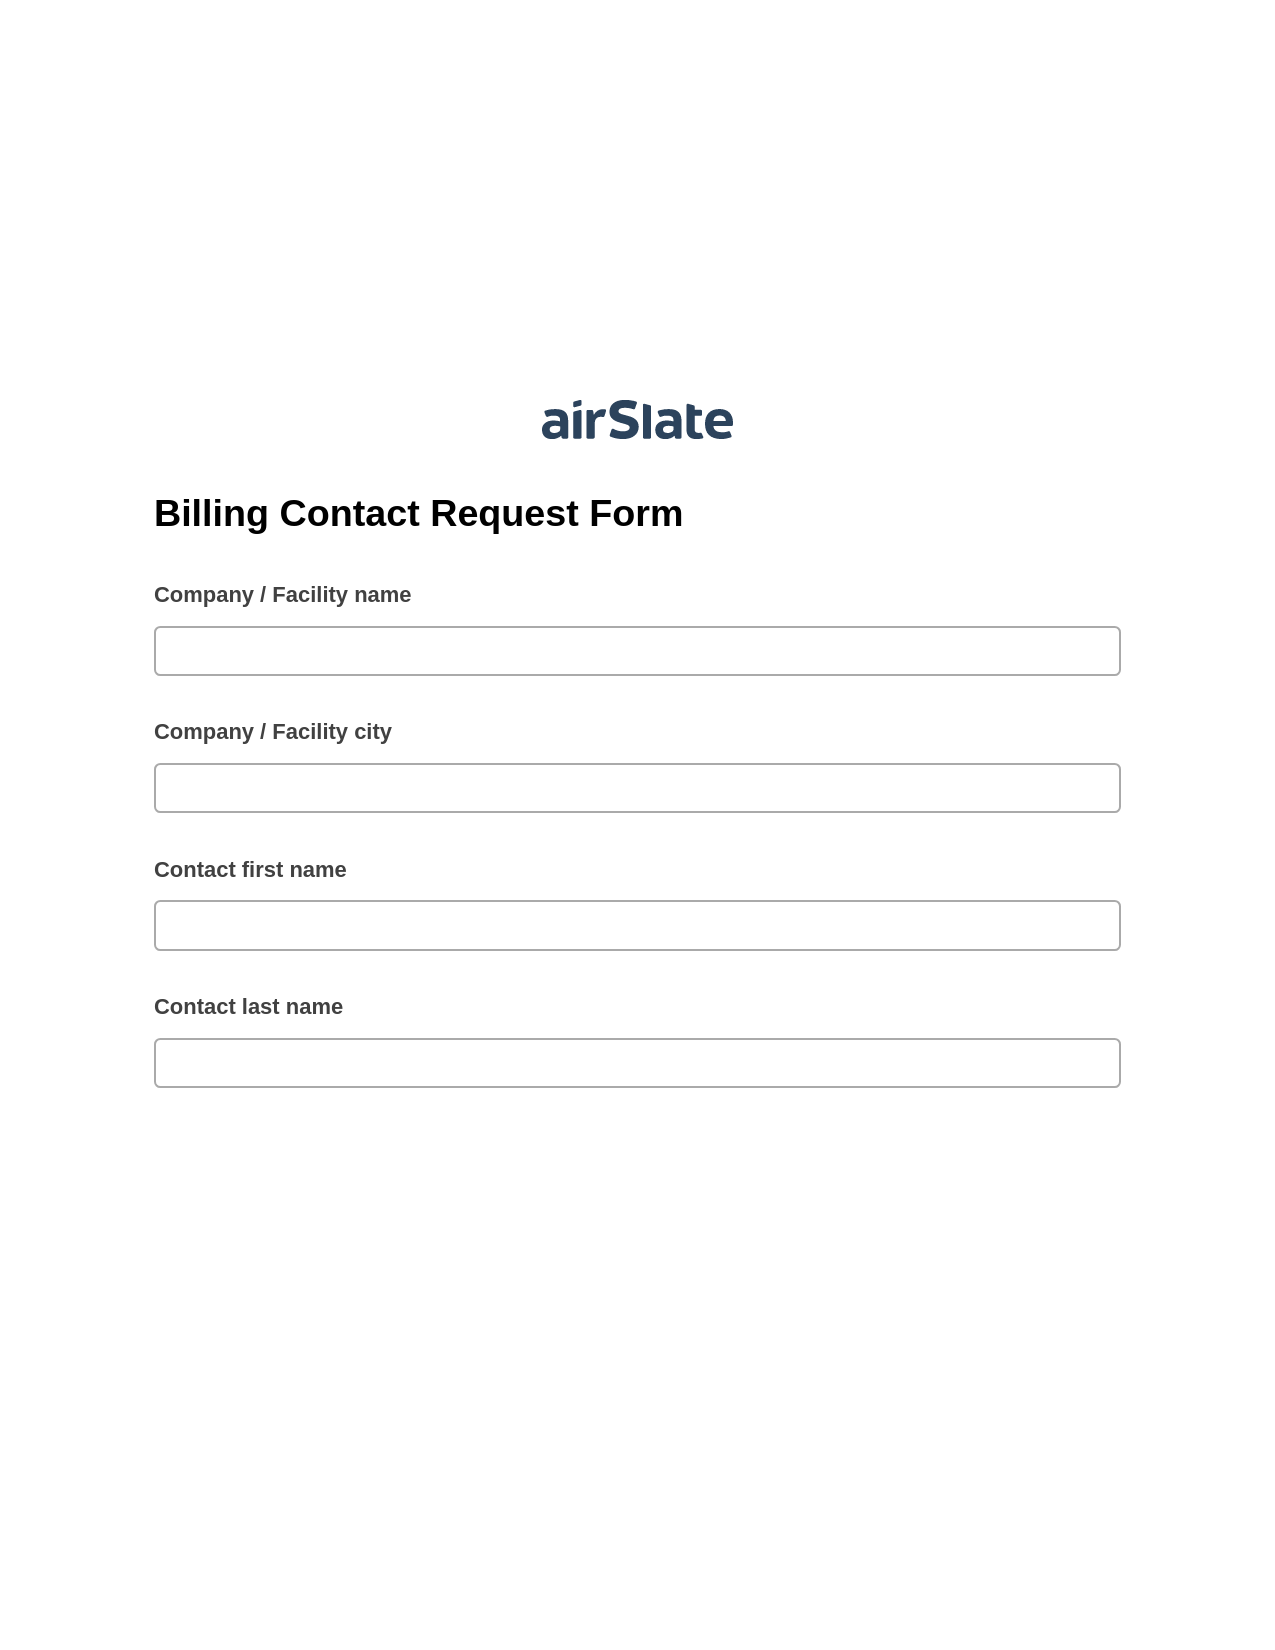 Multirole Billing Contact Request Form Pre-fill Slate from MS Dynamics 365 Records Bot, Create slate bot, Email Notification Postfinish Bot